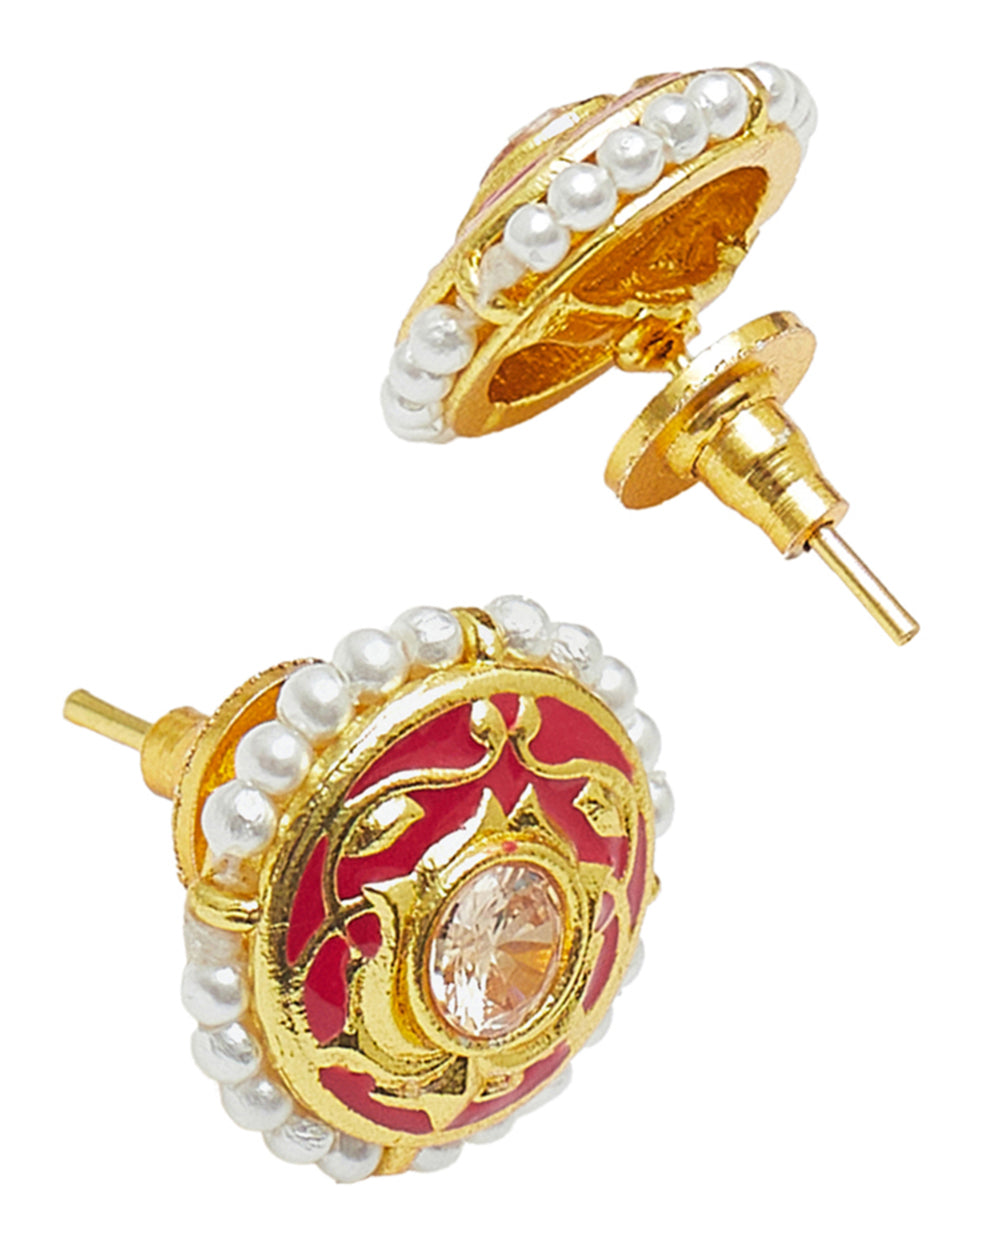 Women's Apsra Collection Traditional Red Gold Plated Earrings - Voylla